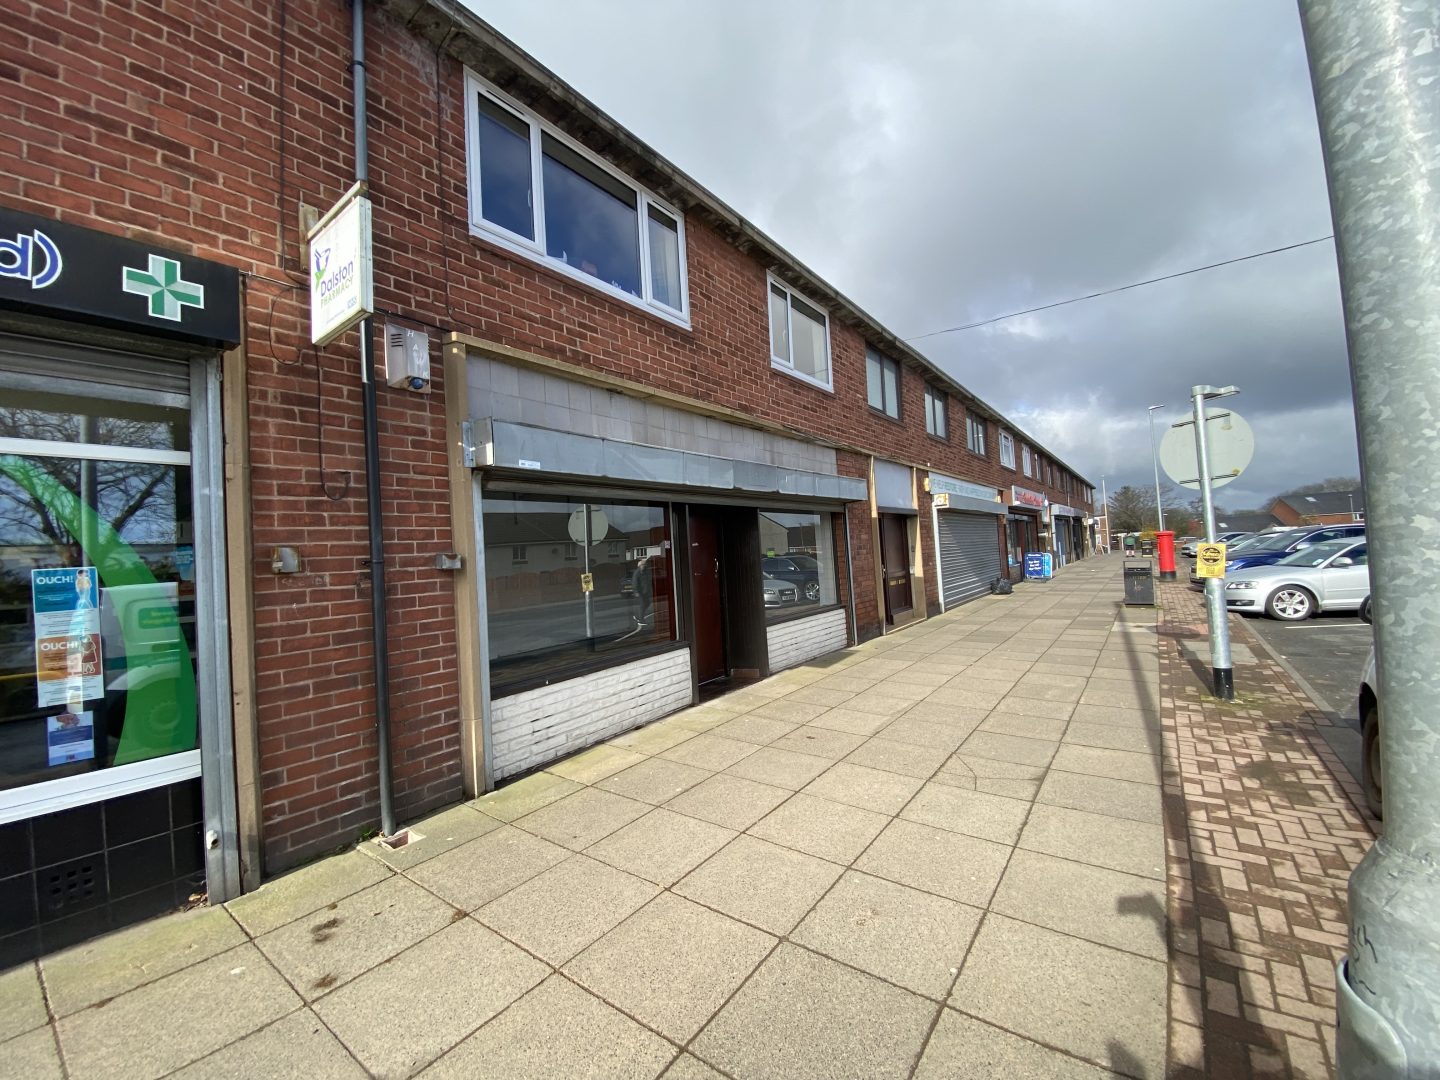 6 Central Avenue, Carlisle – LET (SUBJECT TO CONTRACT)